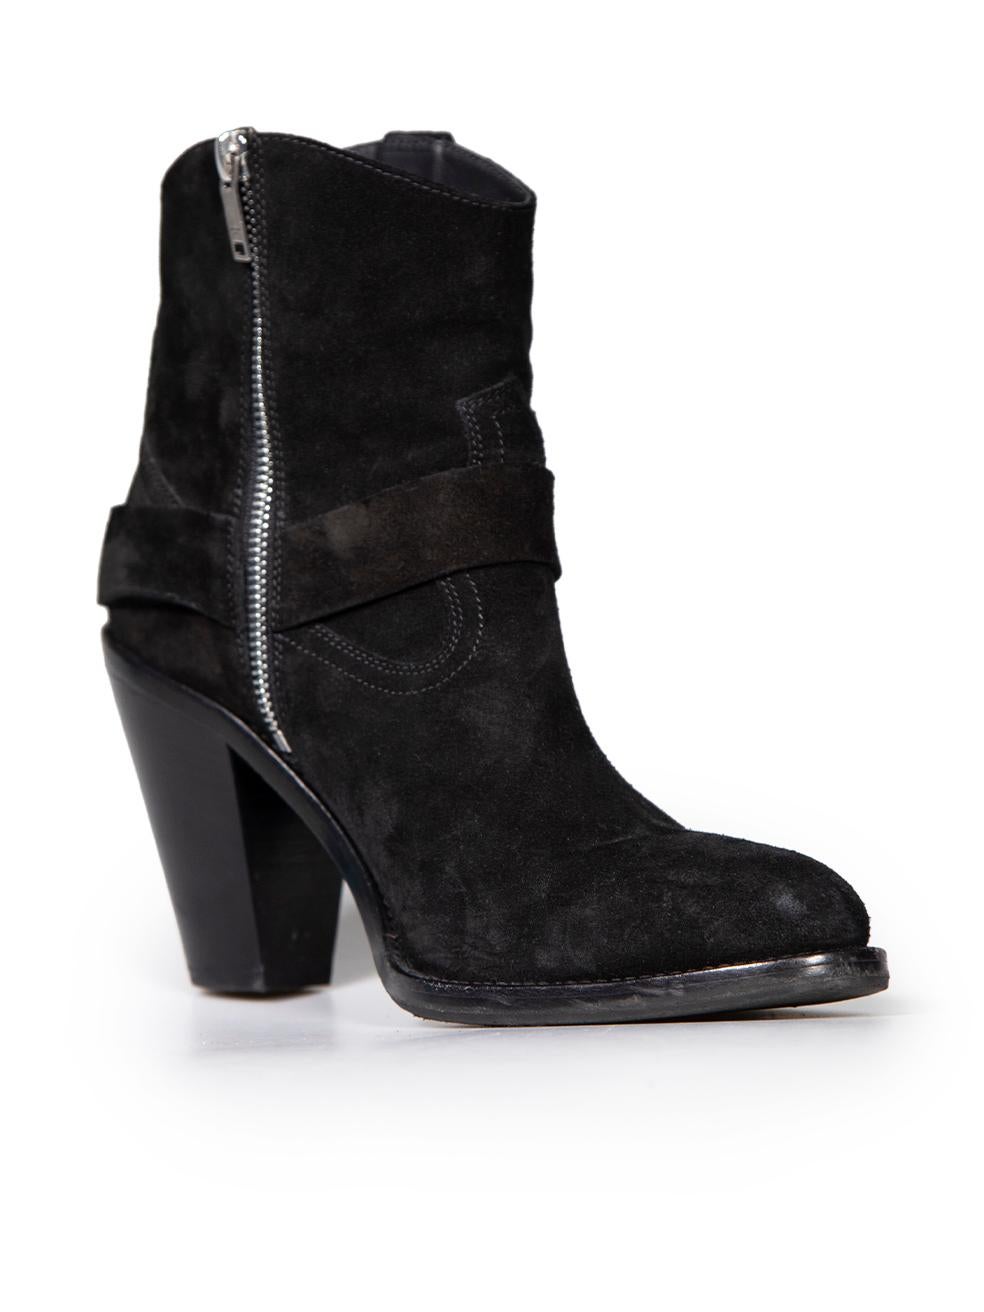 CONDITION is Very good. Minimal wear to boots is evident. Minimal wear to both boot heels and sole trims - particularly at the toes - with abrasion marks on this used Saint Laurent designer resale item.
 
 
 
 Details
 
 
 Black
 
 Suede
 
 Ankle